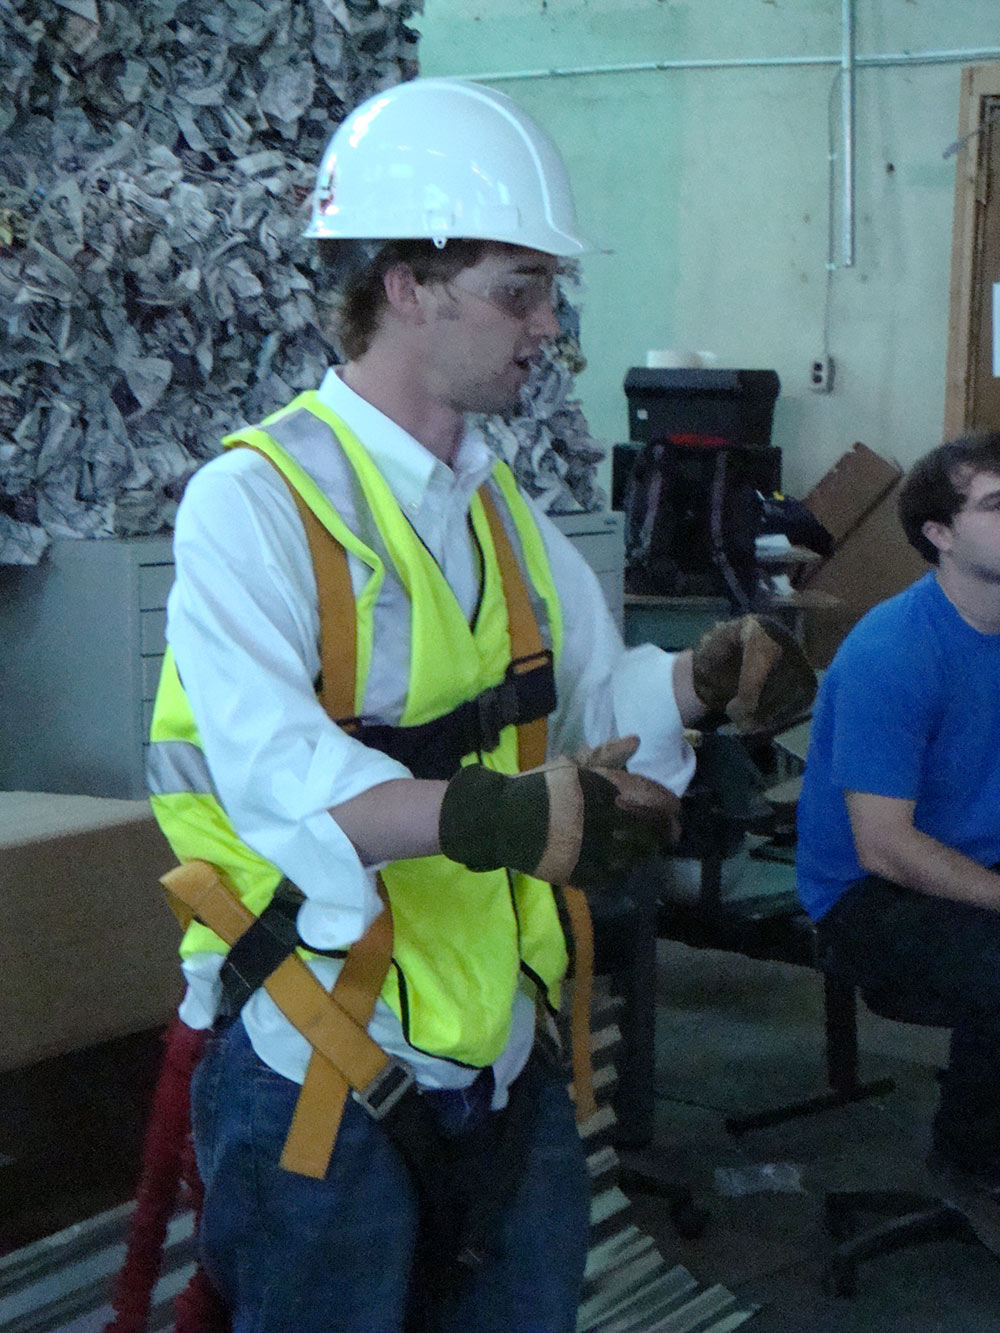 person wearing construction PPE